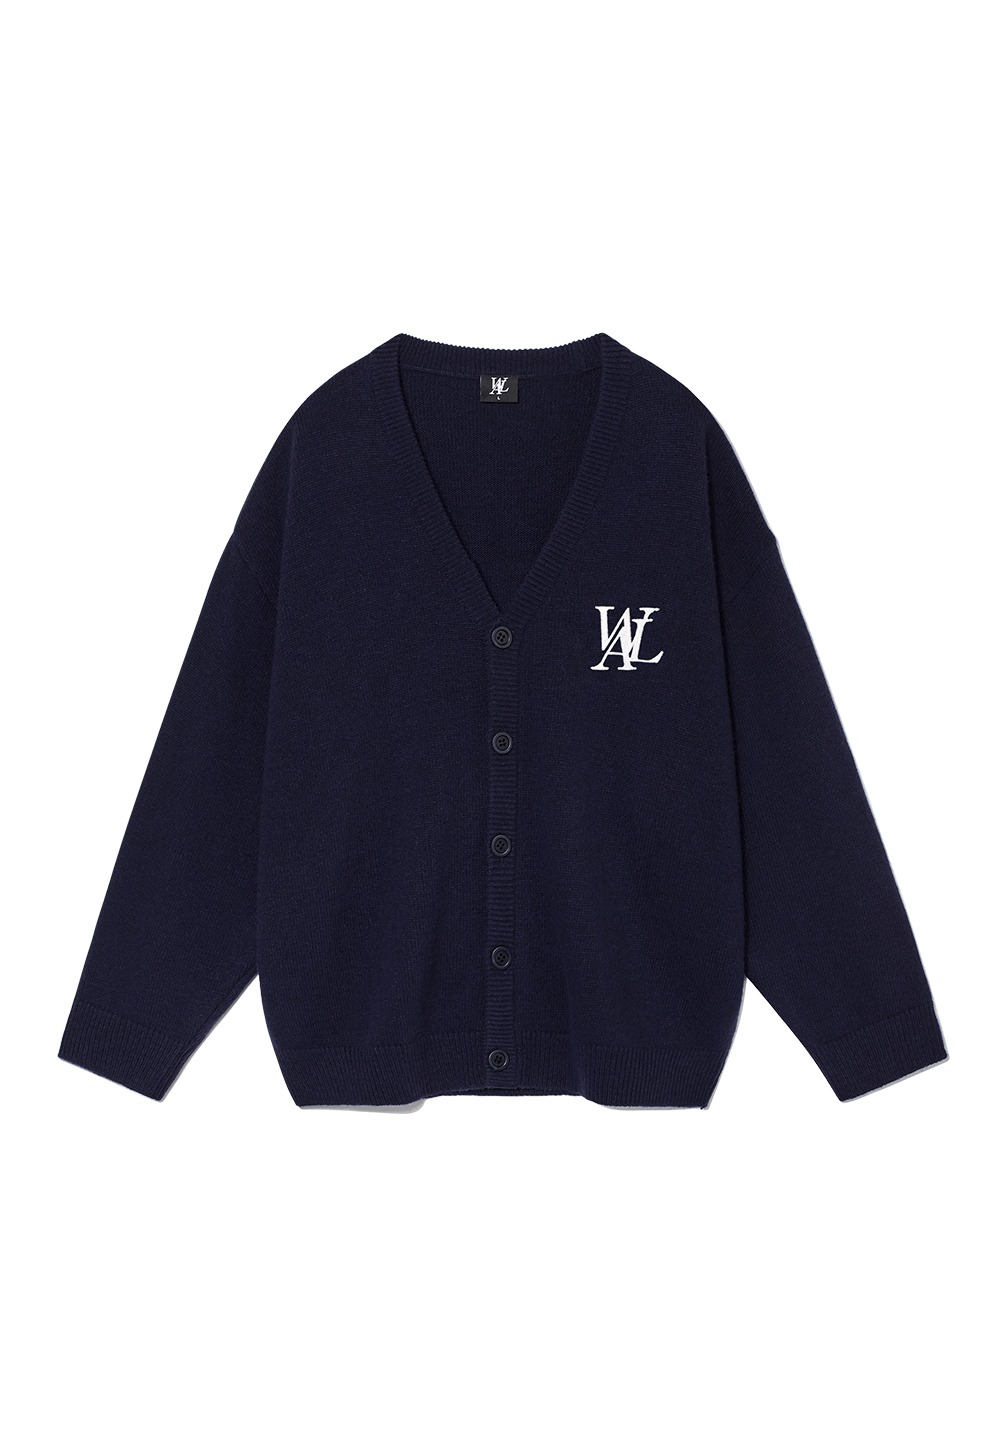 Signature daily over fit knit cardigan - NAVY